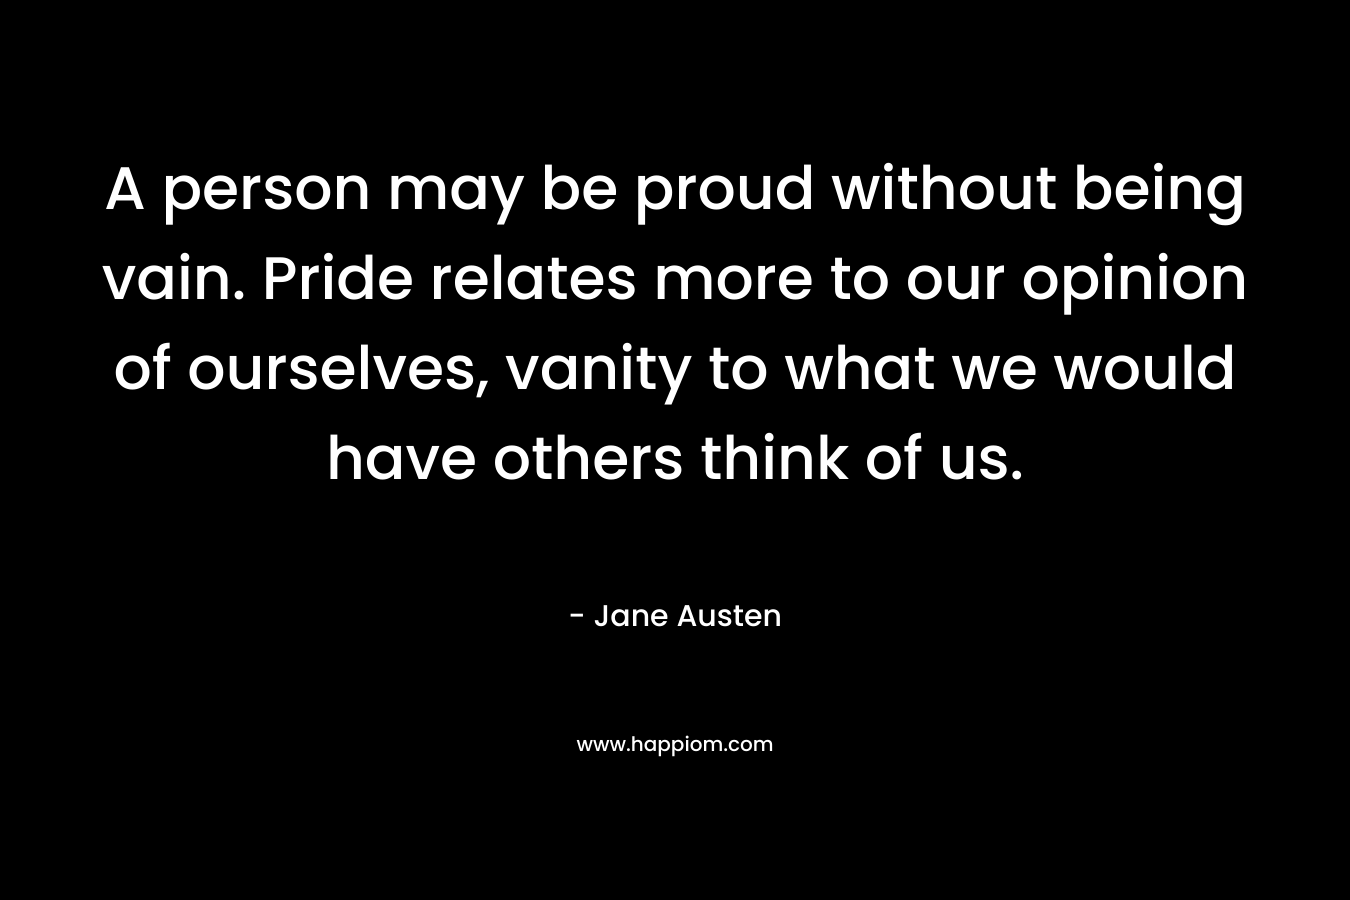 A person may be proud without being vain. Pride relates more to our opinion of ourselves, vanity to what we would have others think of us. – Jane Austen